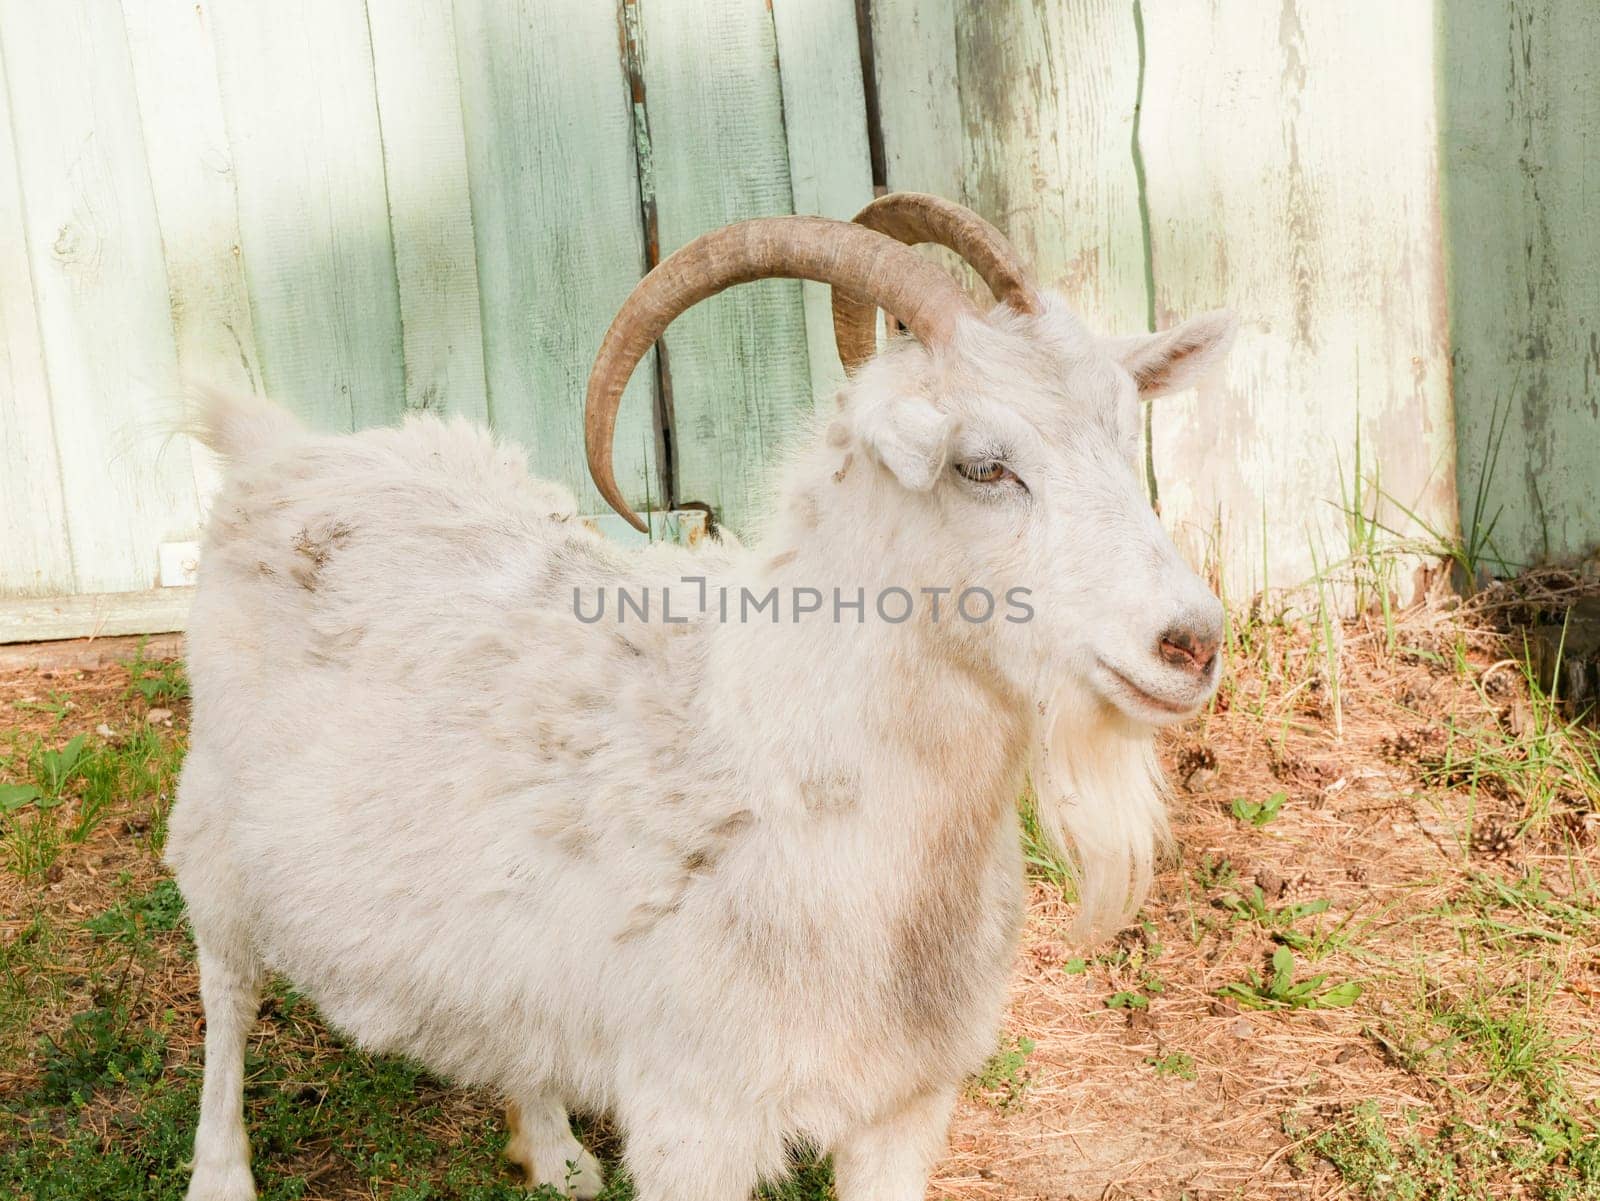 Beautiful White horned Goat with beard near the Village house by macroarting